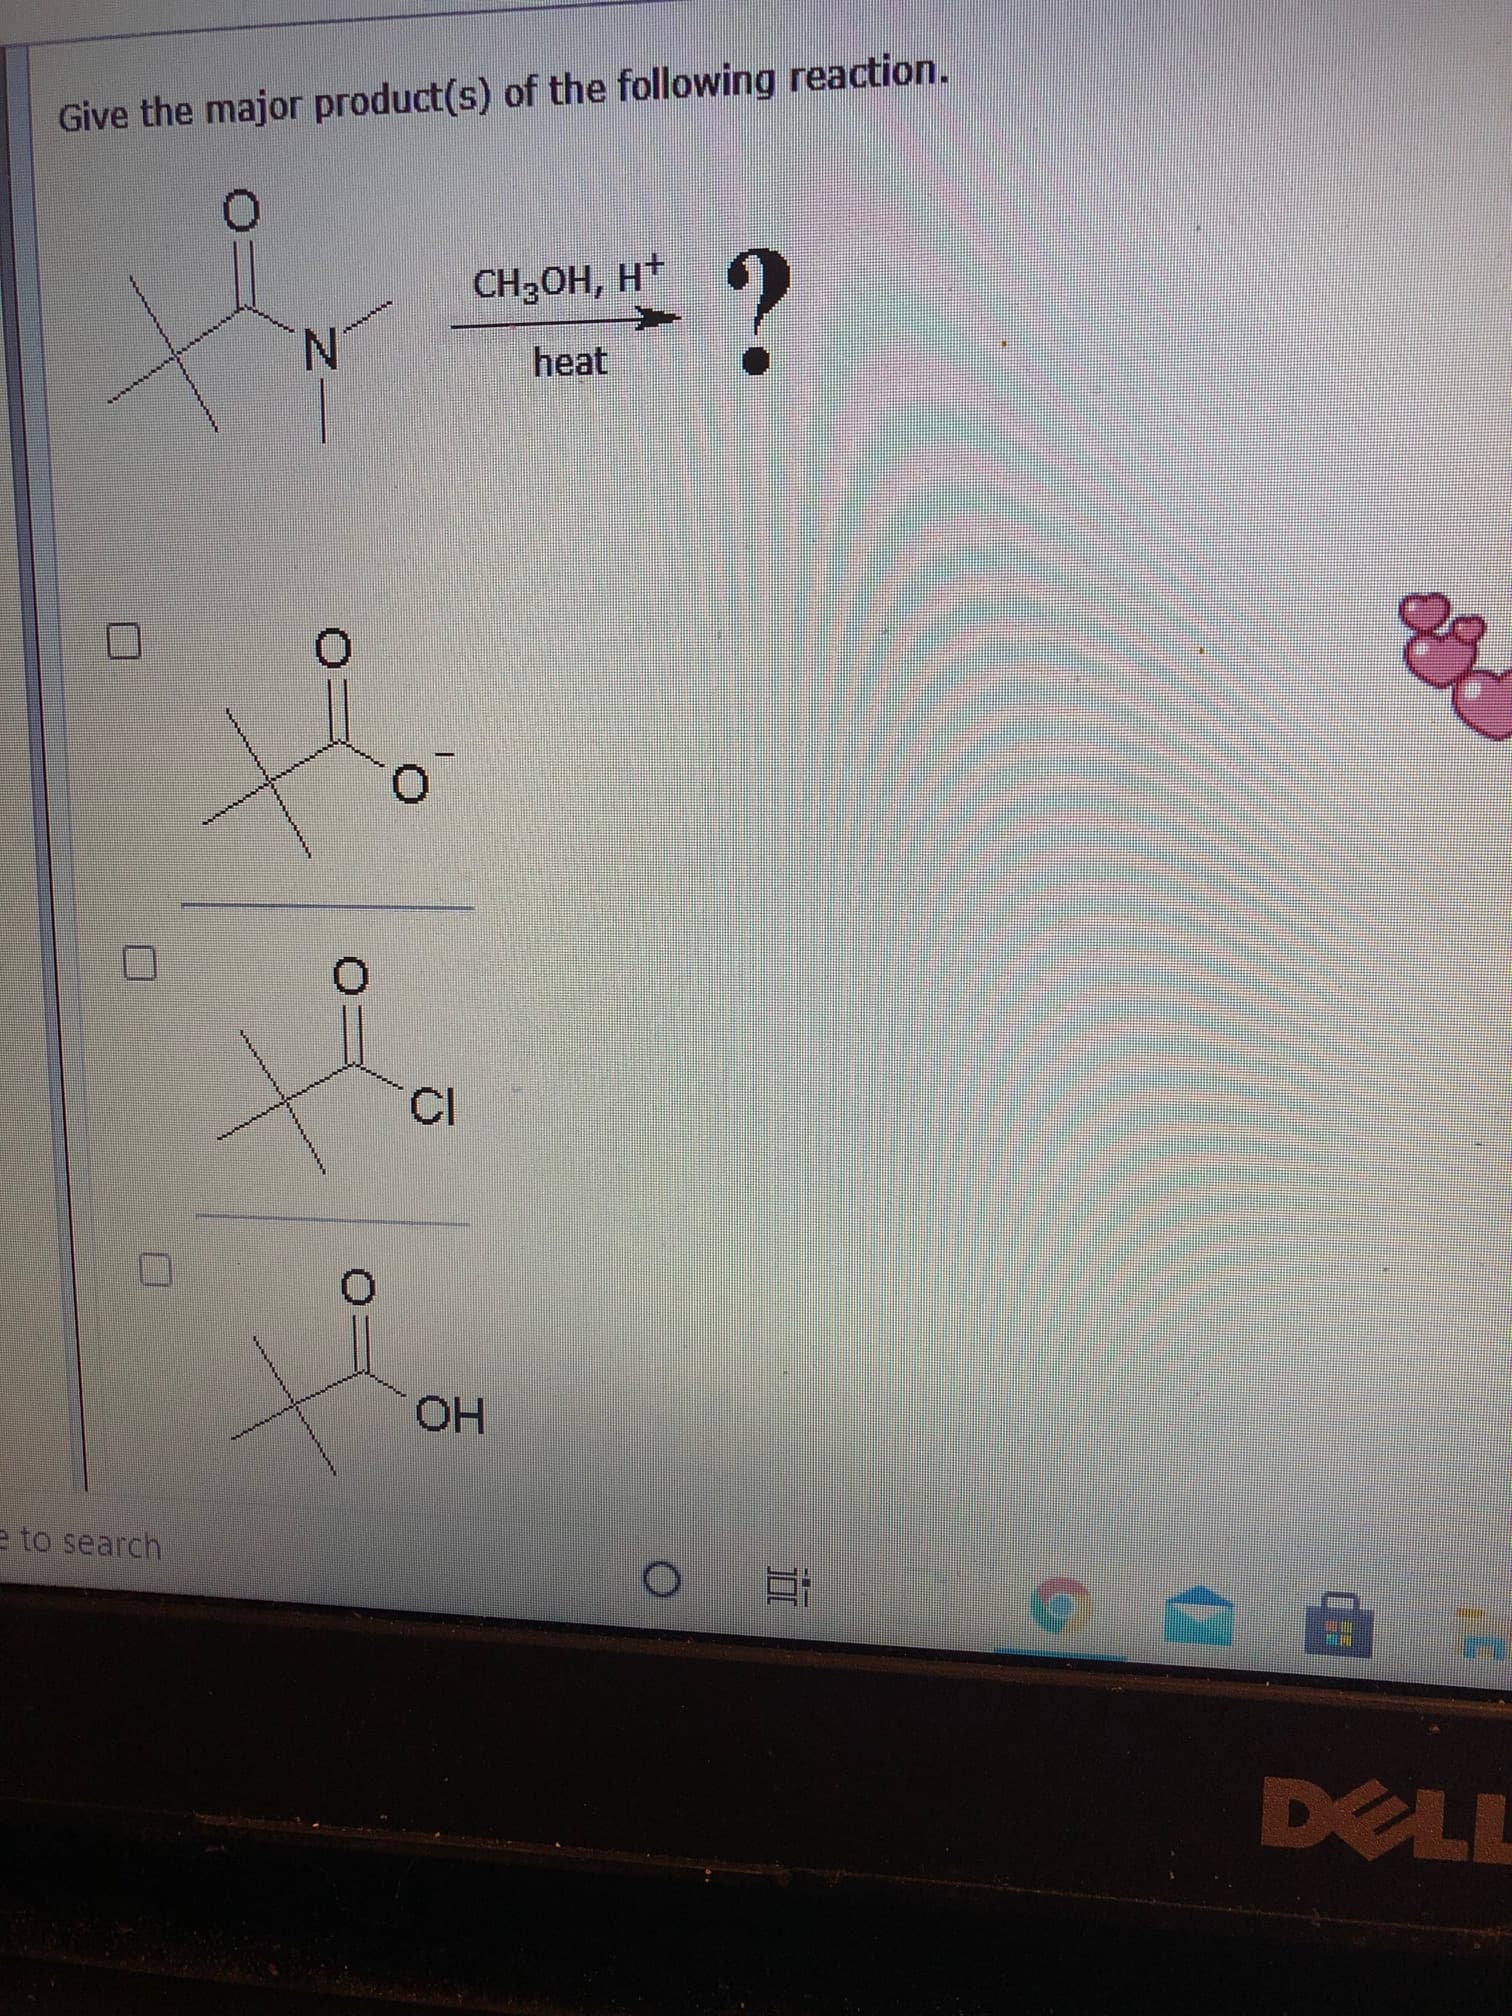 Give the major product(s) of the following reaction.
CH3OH, H+
N.
heat
CI
